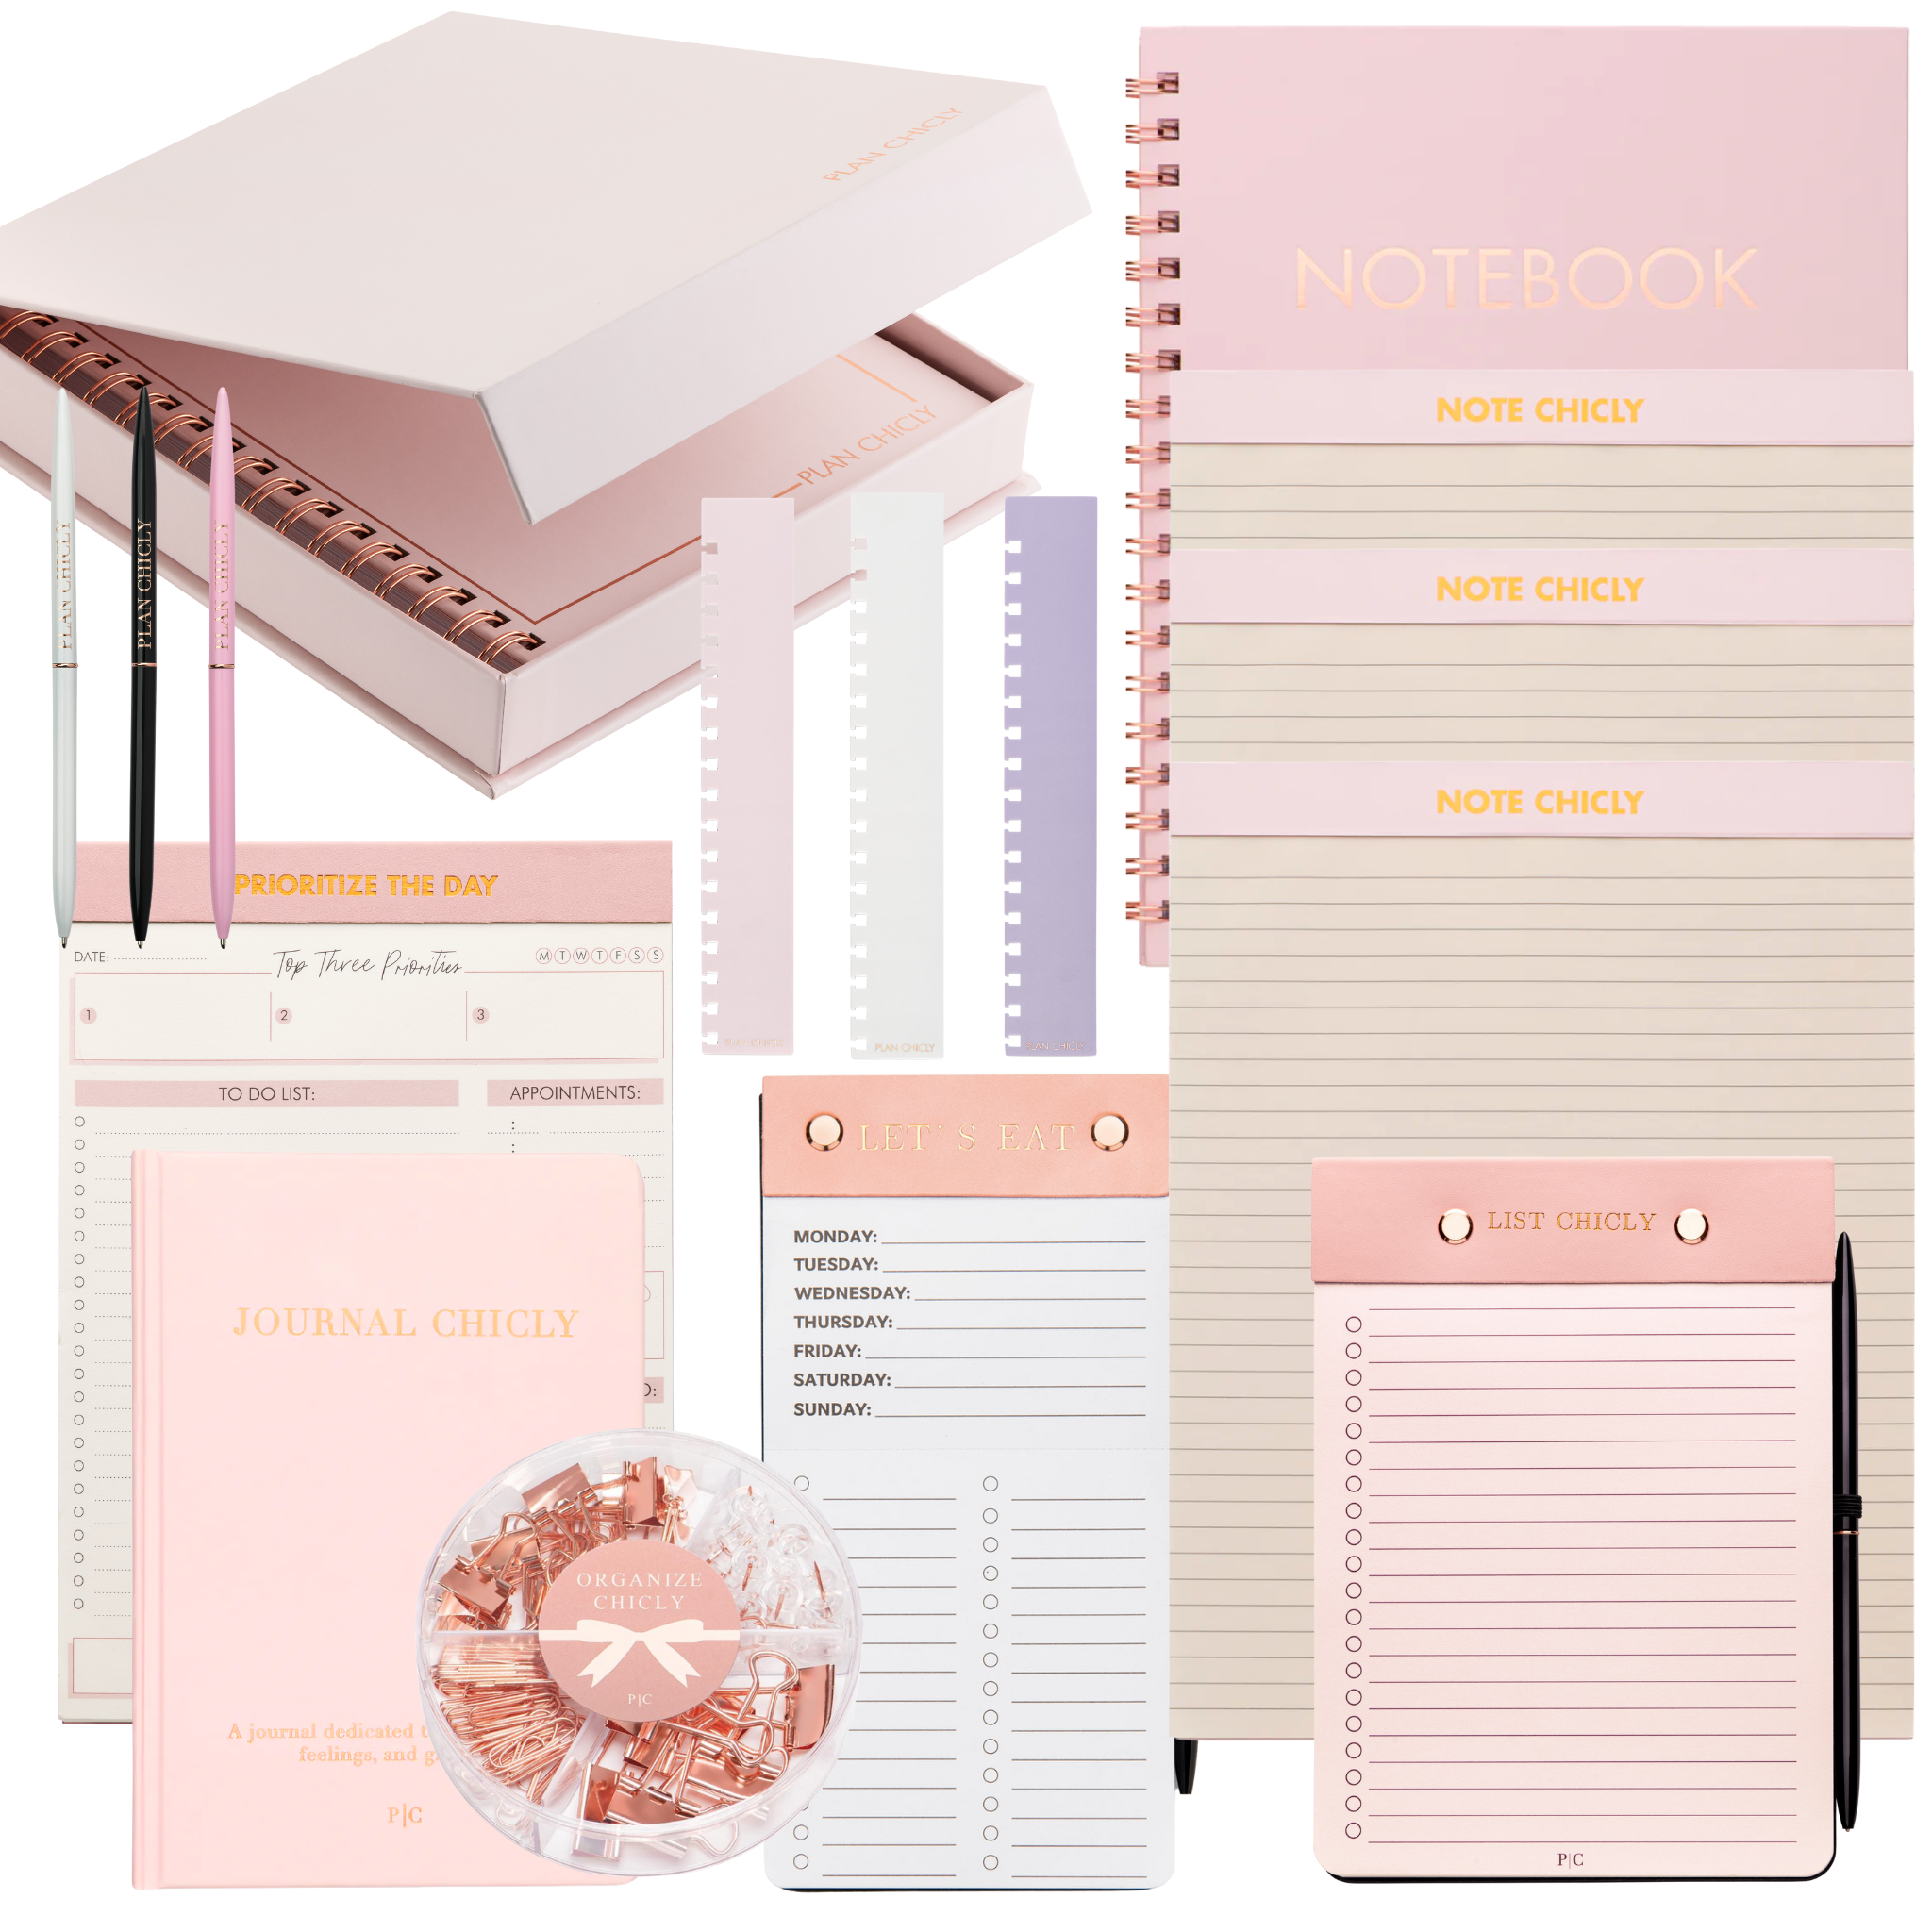 Planner Supplies Storage for Under $20 - The Chic Life